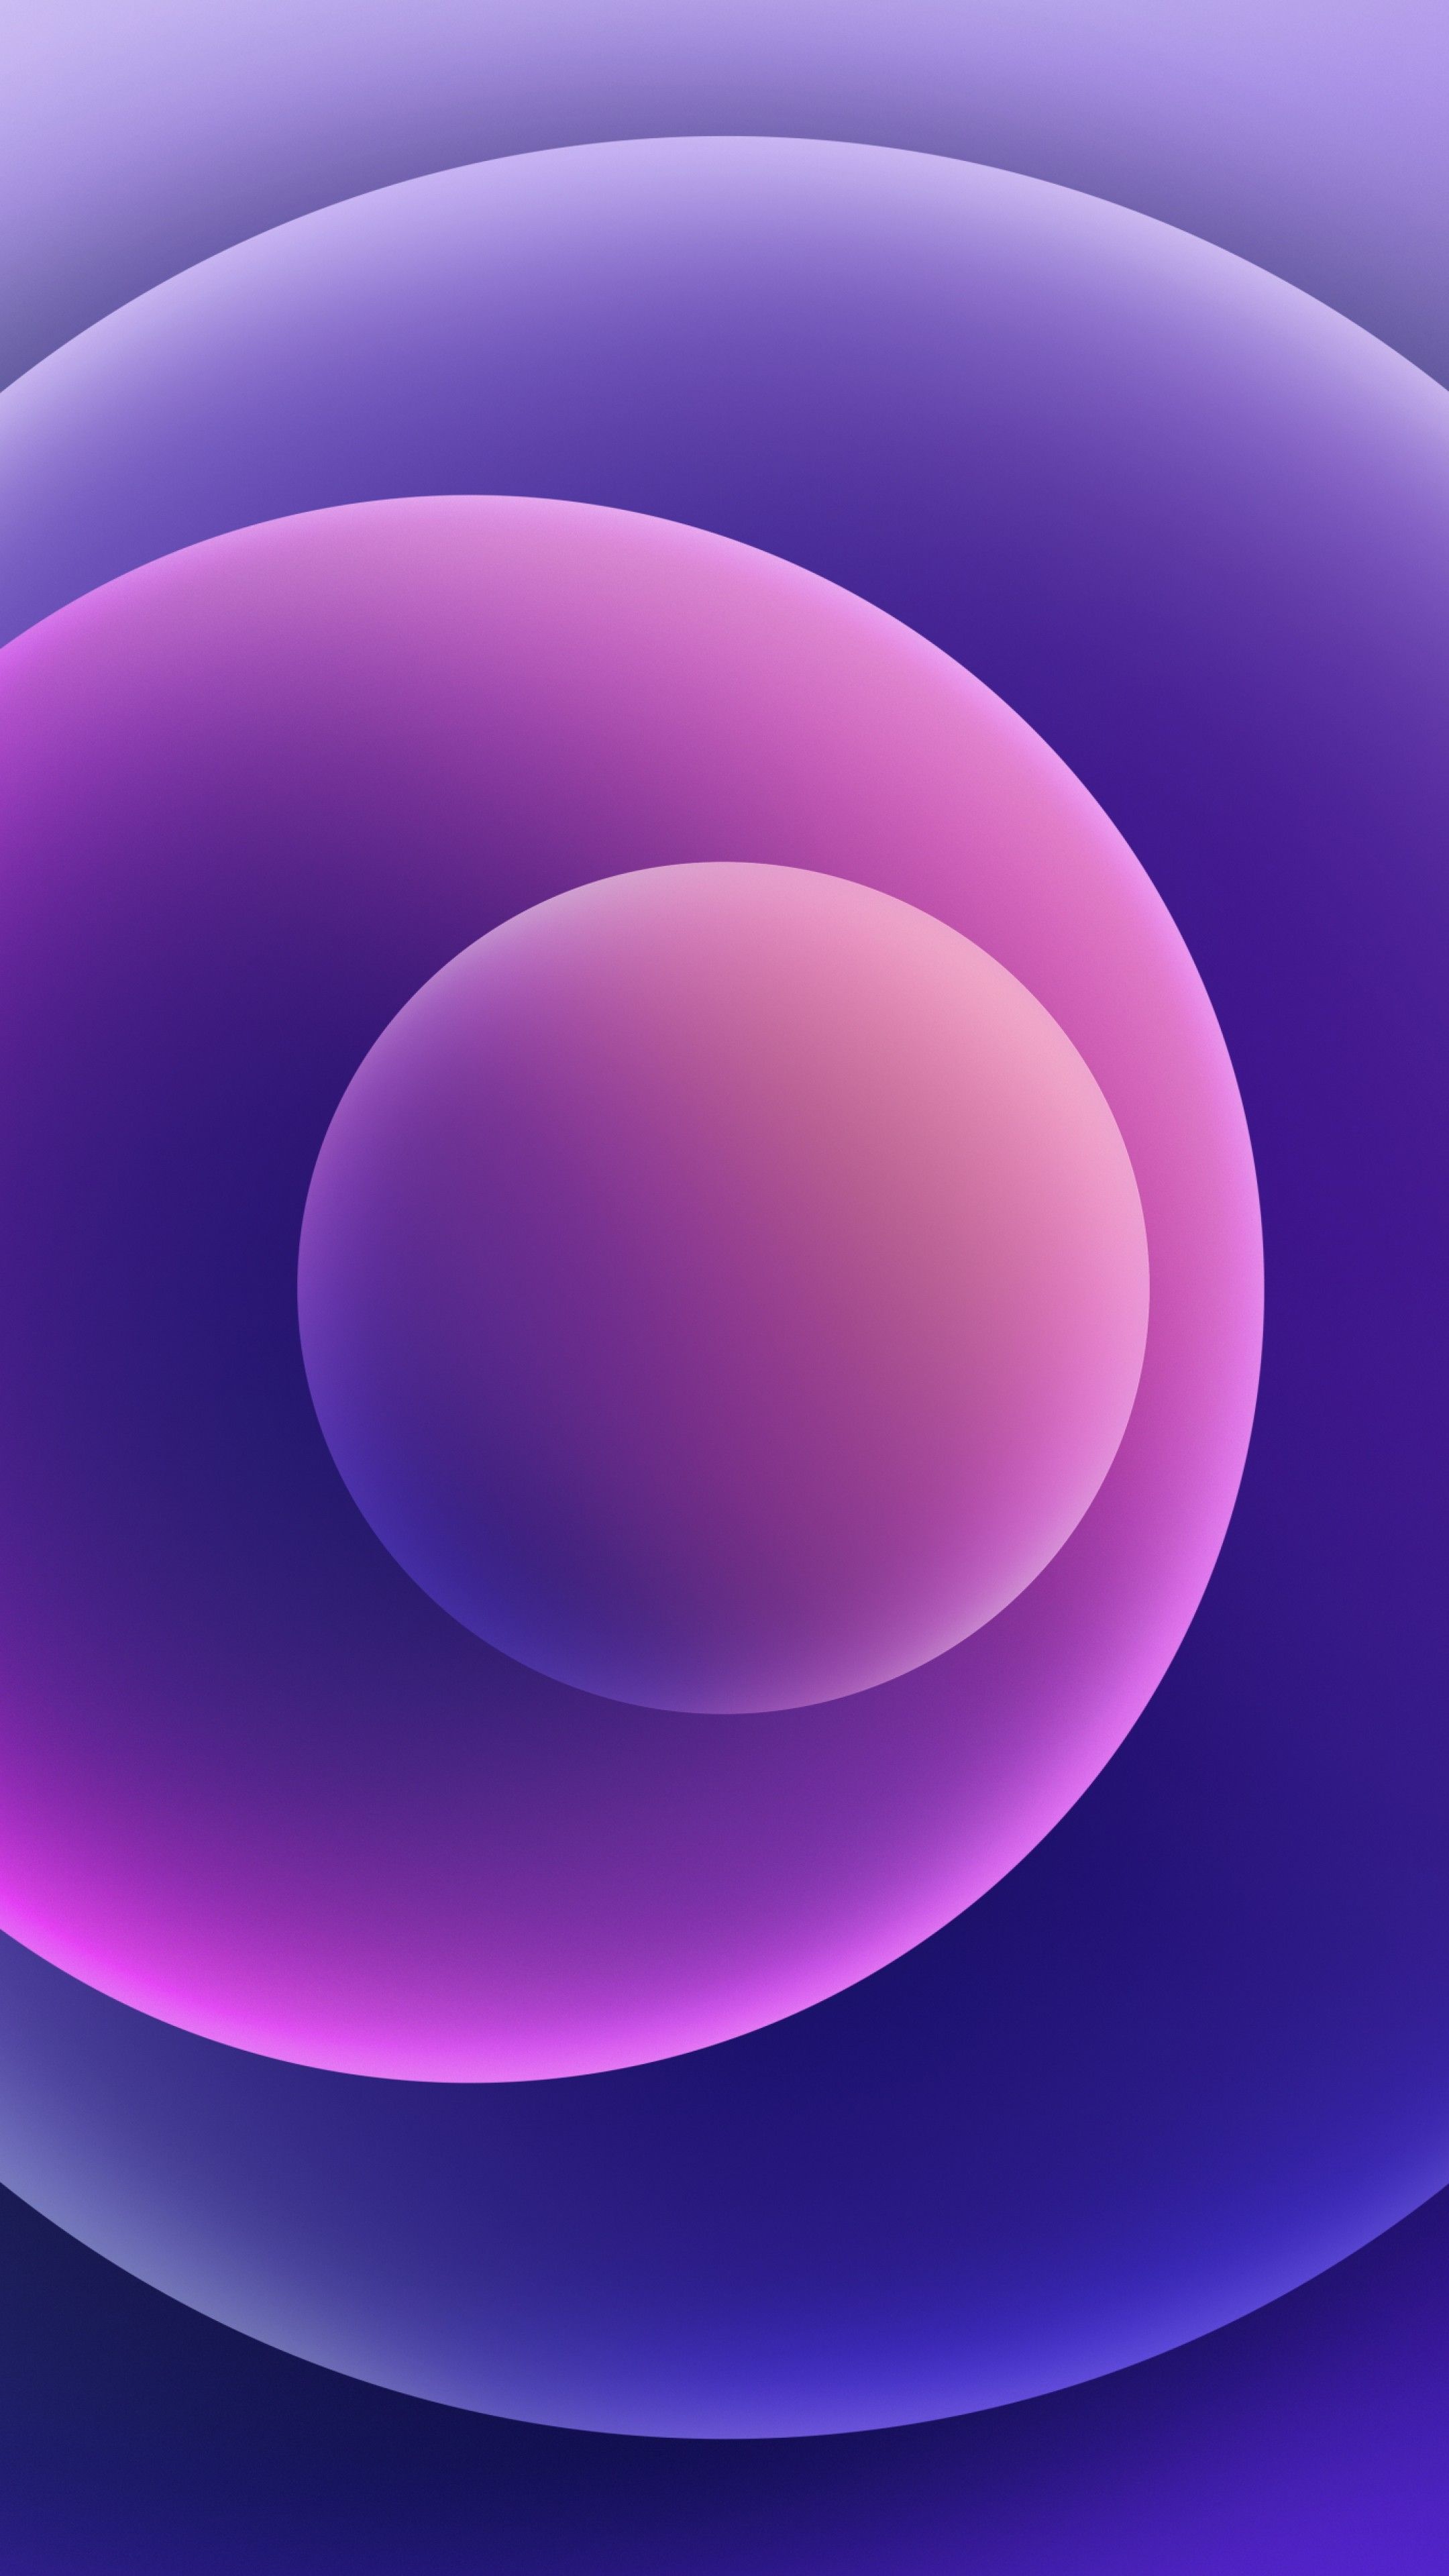 Wallpaper iPhone purple, abstract, Apple April 2021 Event, 4K, OS